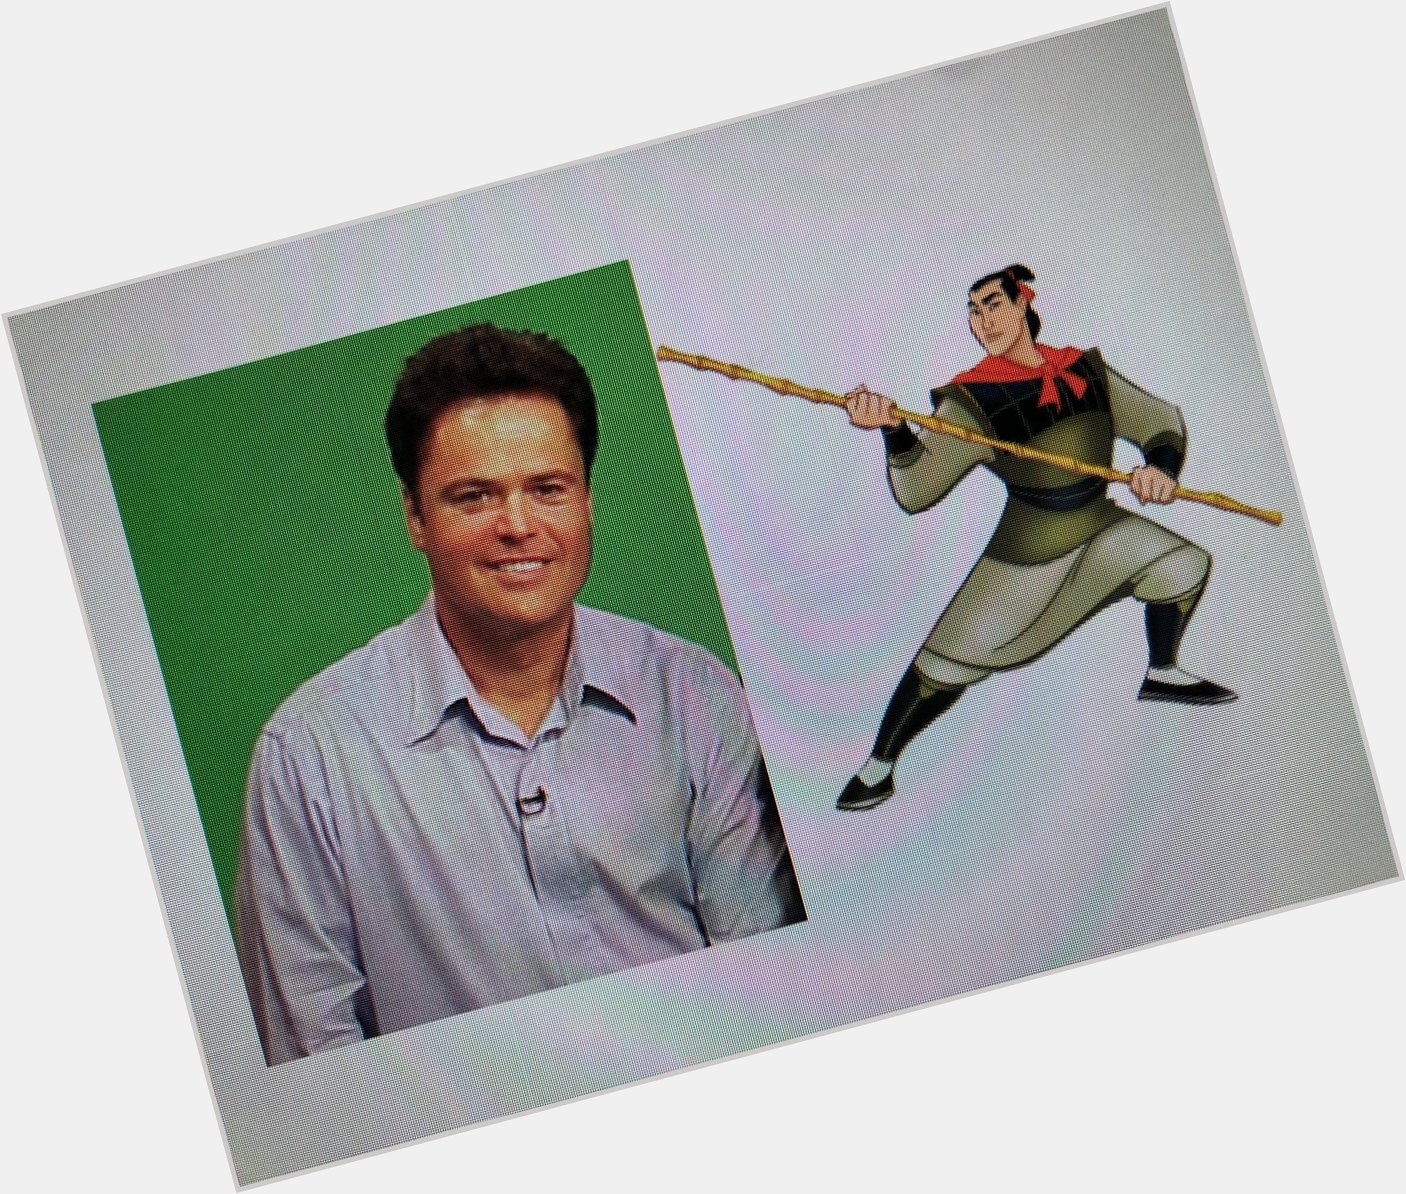 Happy 62nd Birthday to Donny Osmond! The singing voice of Shang in Mulan. 